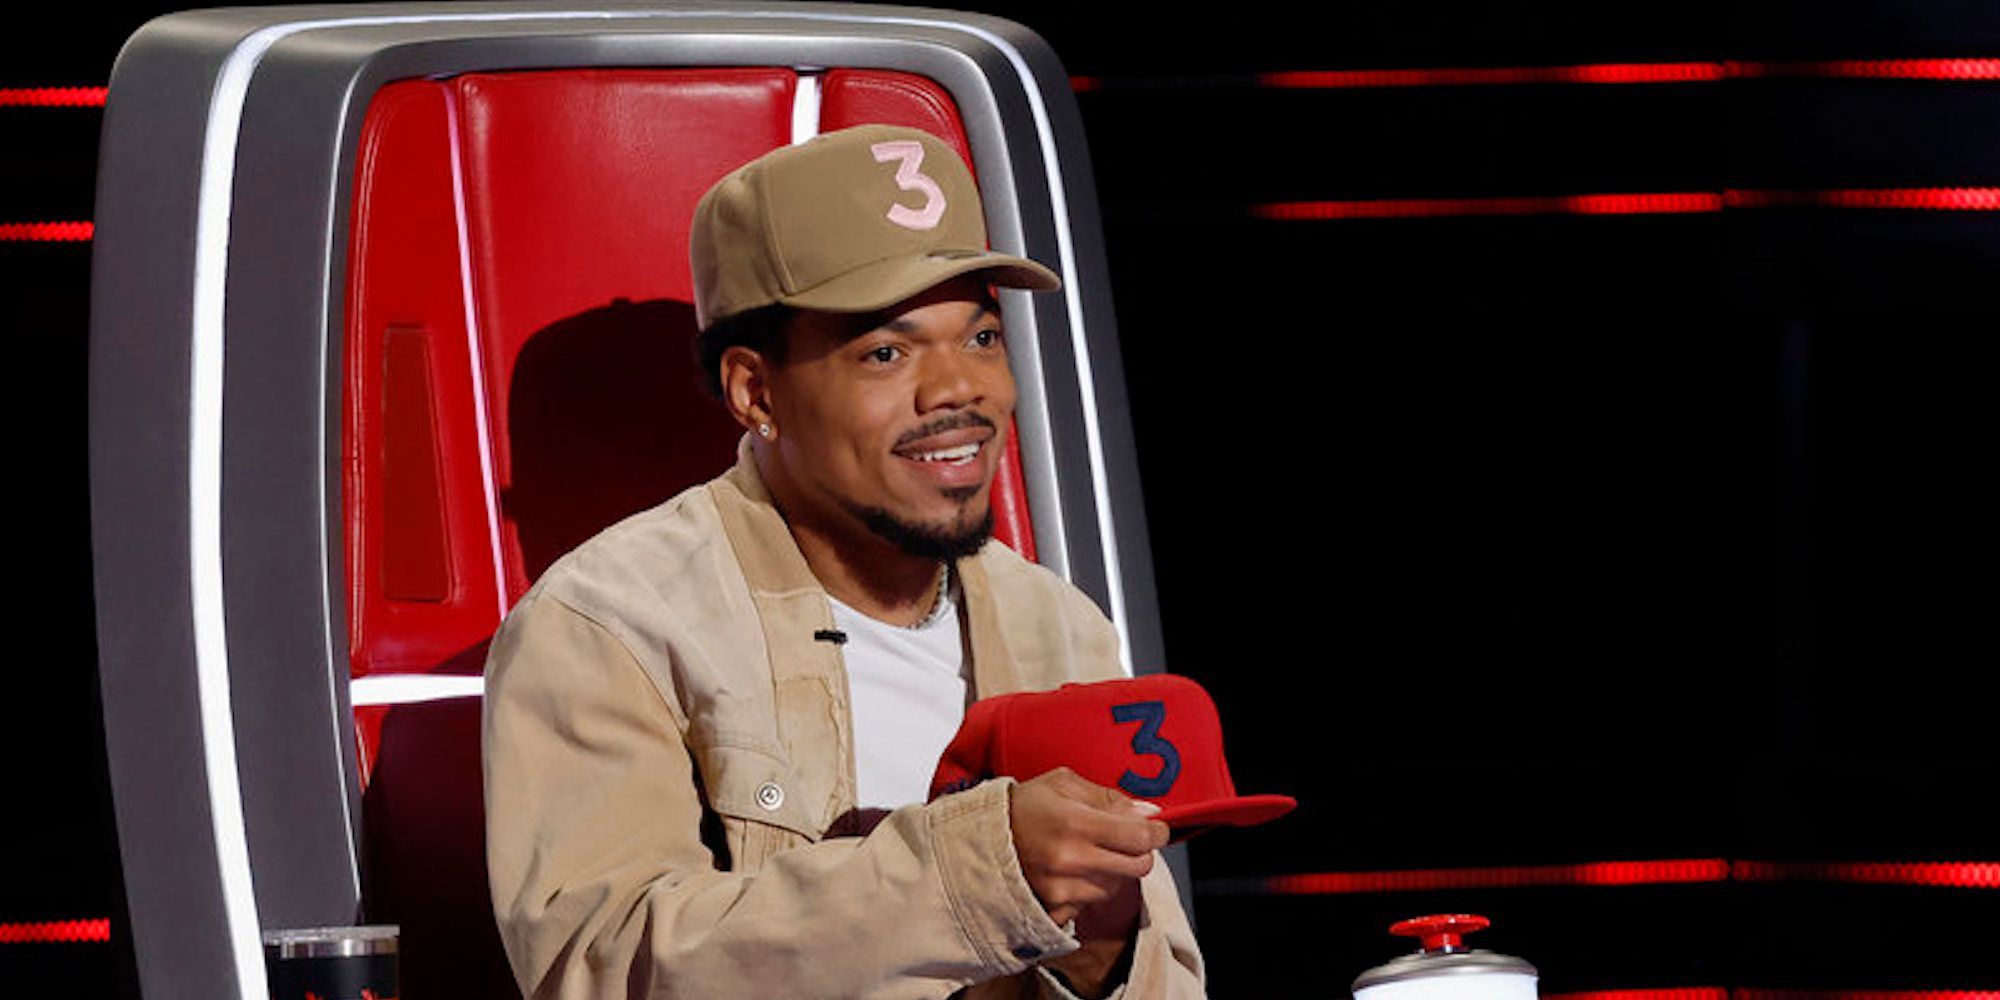 Chance the Rapper attempts to persuade a contestant on 'The Voice' with a custom "Team Chance" hat featuring his signature number 3 logo